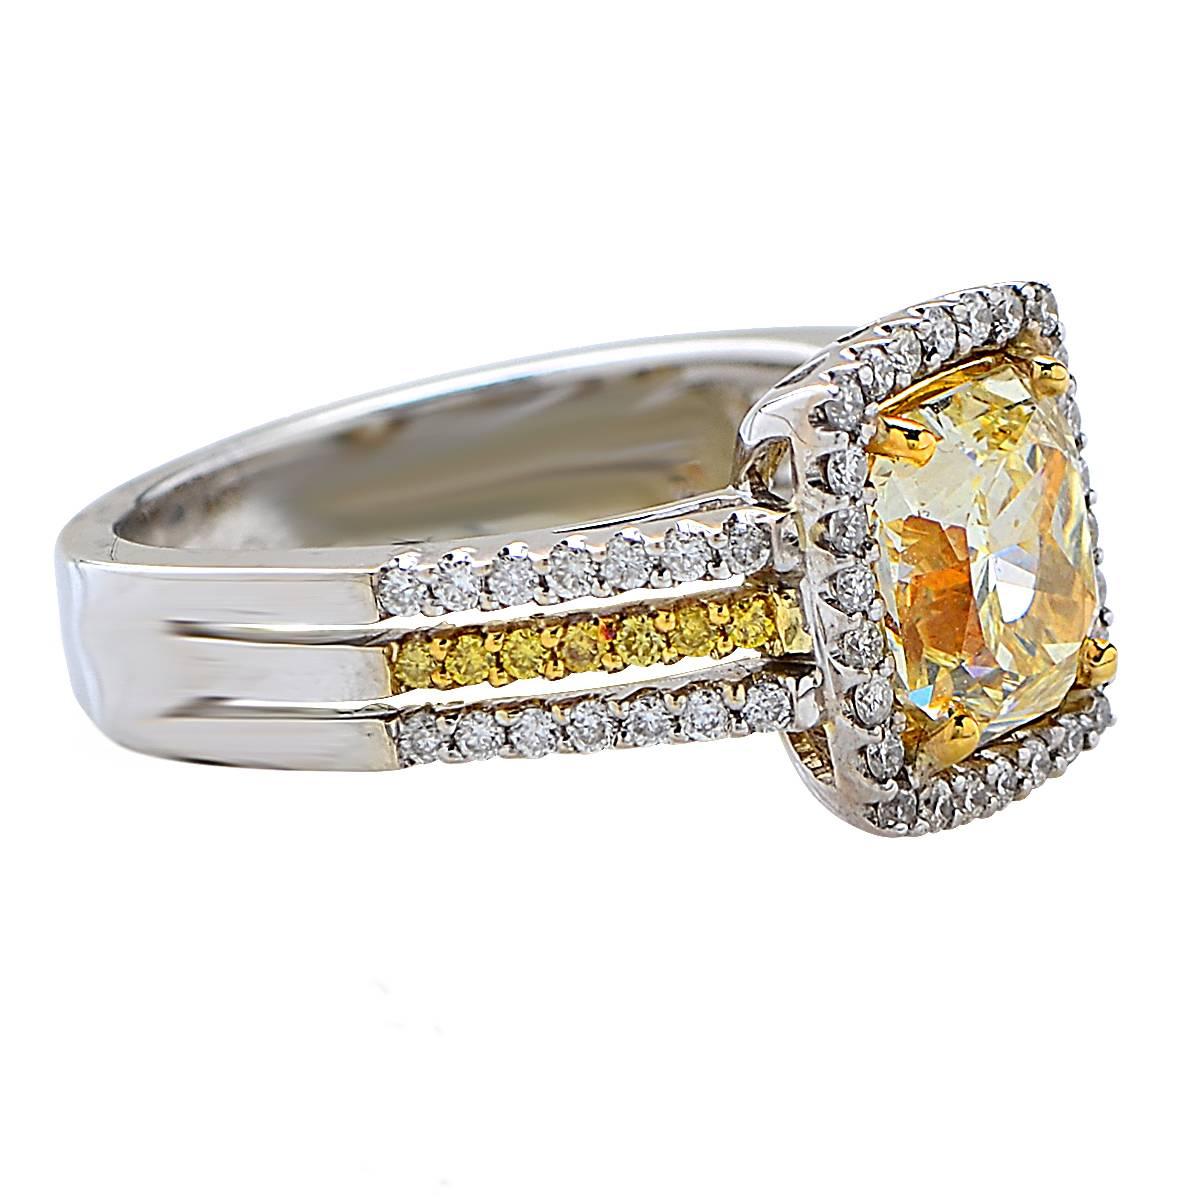 Dazzling ring crafted in 18 karat yellow and white gold, showcasing a GIA Certified natural light yellow radiant cut diamond weighing 2.03 carats, VVS1 clarity, accented by 68 round brilliant cut diamonds weighing approximately .50 carats total.